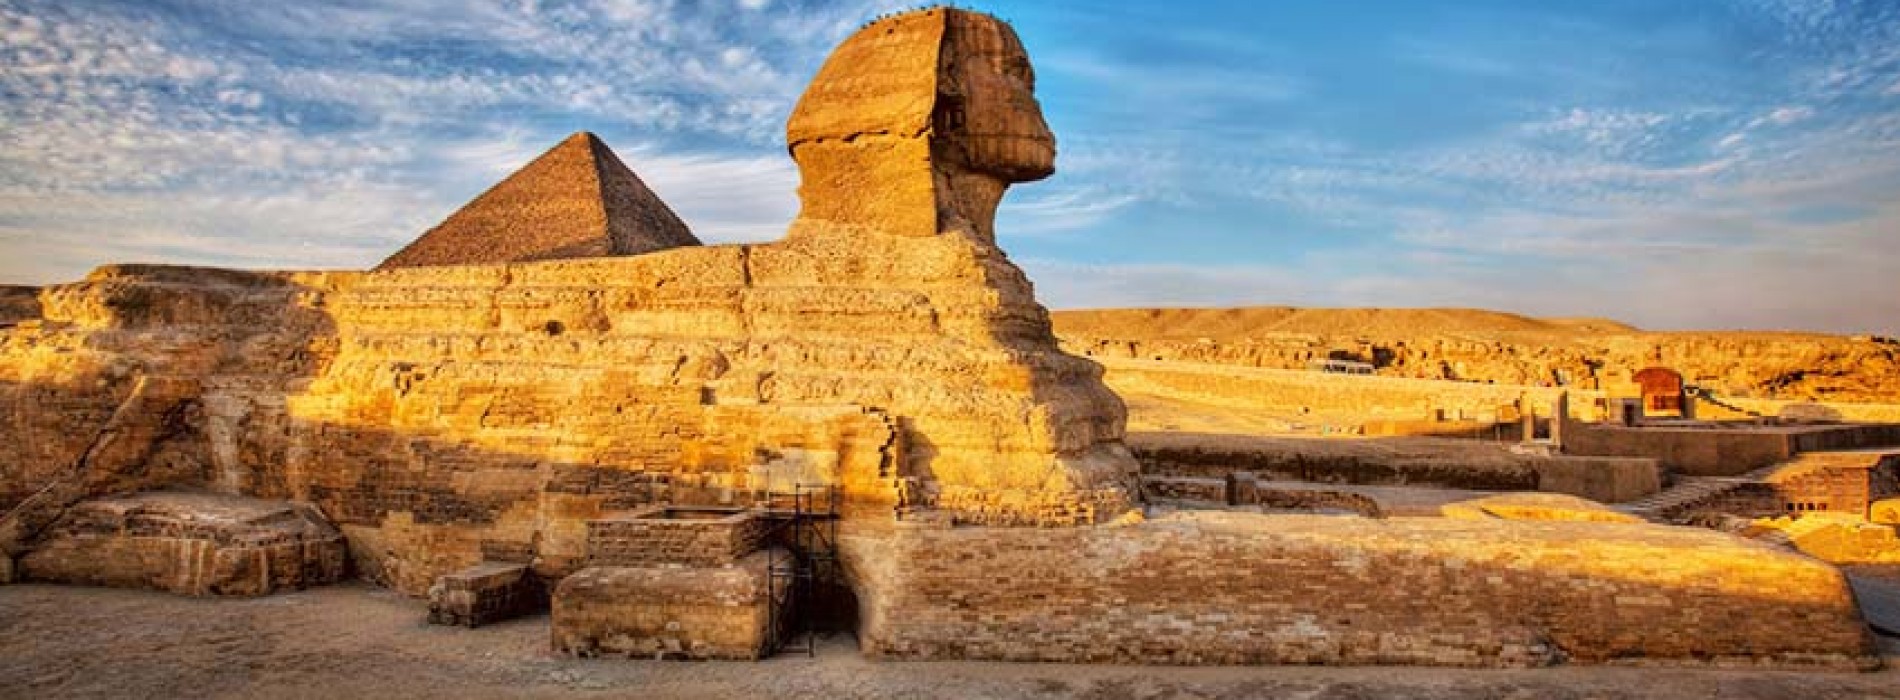 Popular Destinations to Visit in Egypt